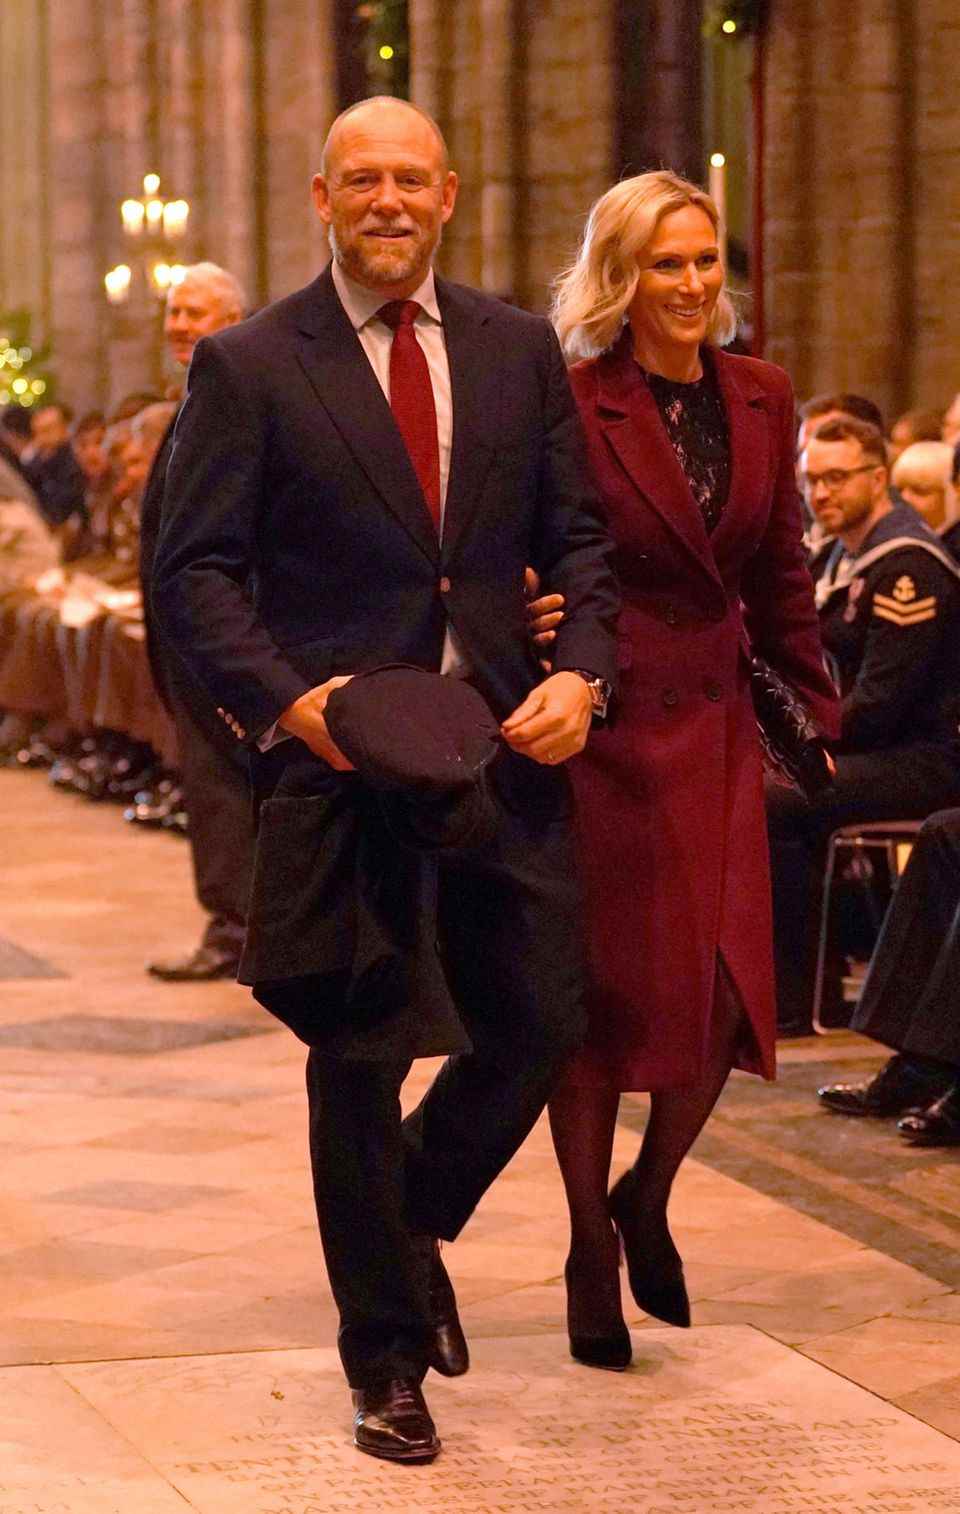 Mike and Zara Tindall at the "Together at Christmas" Christmas Ceremony at Westminster Abbey.